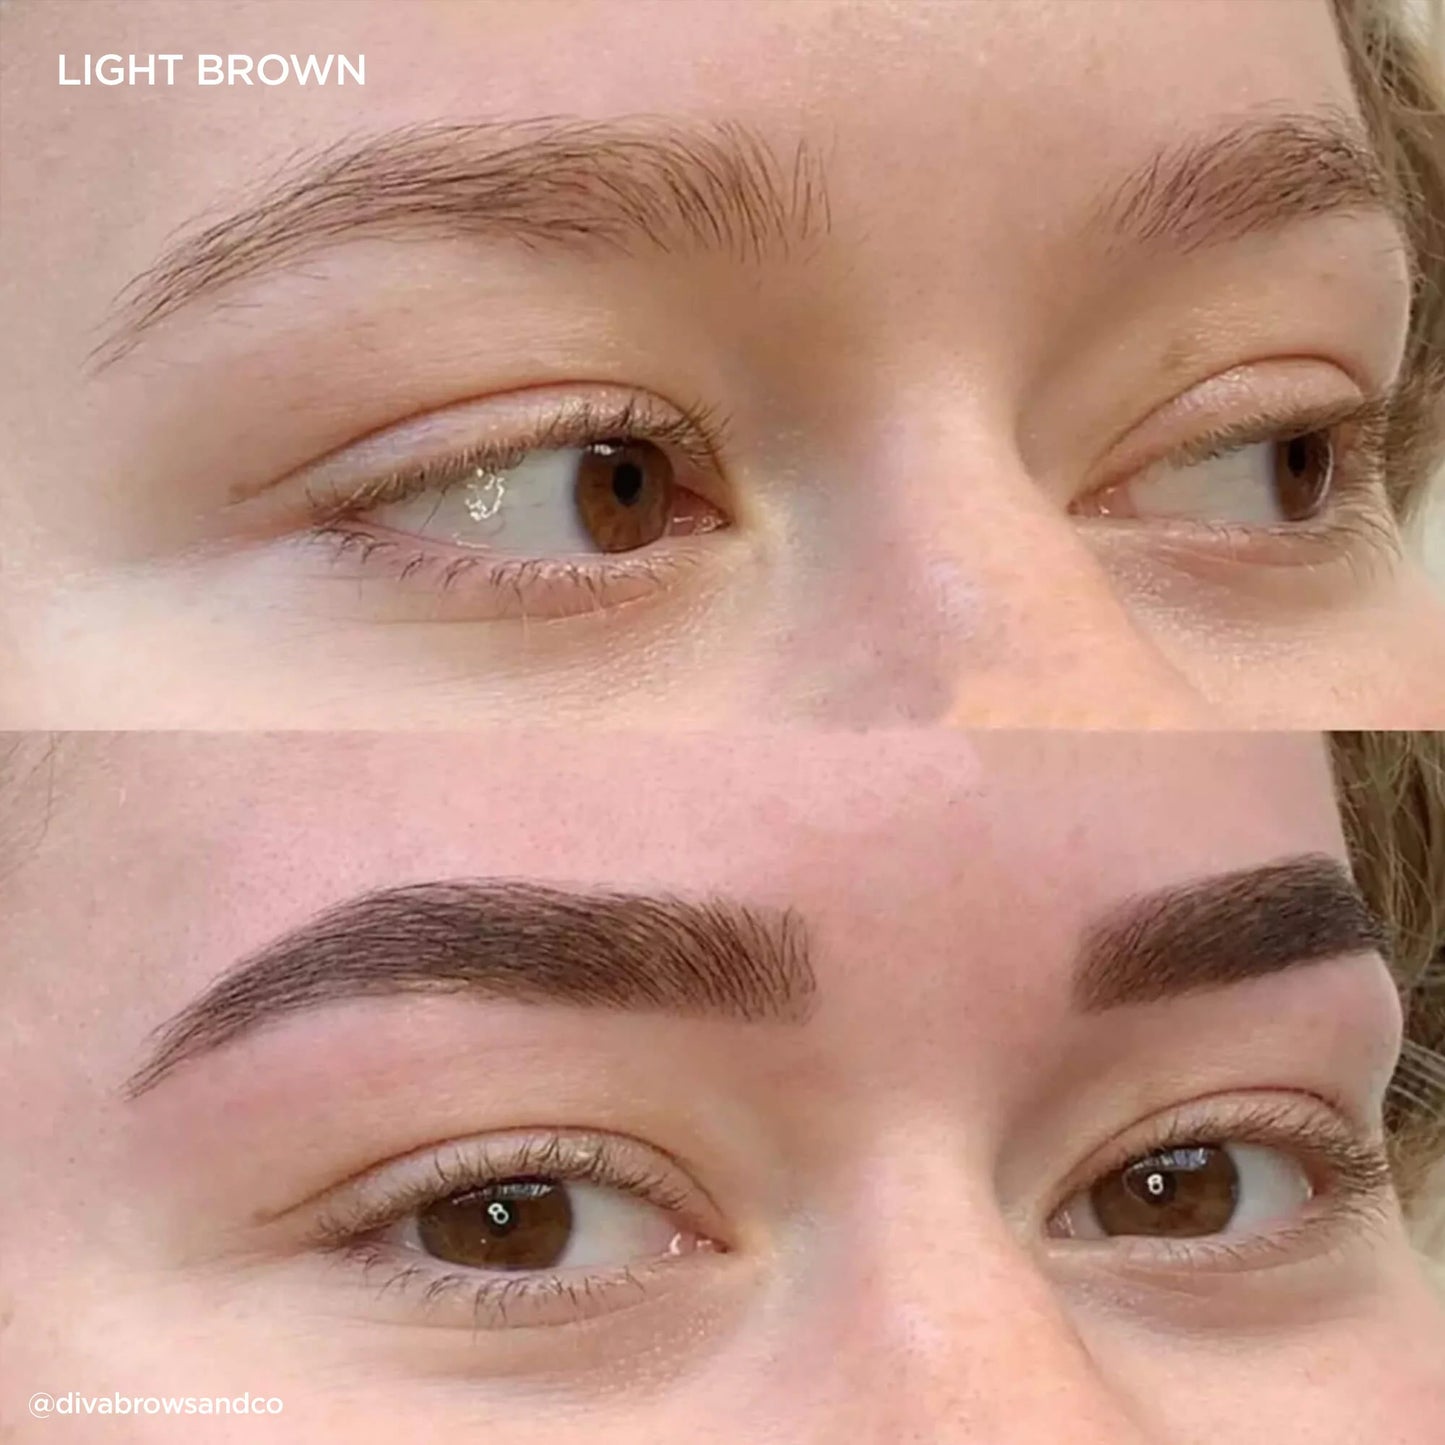 Before and after of model wearing Color-Light-Brown